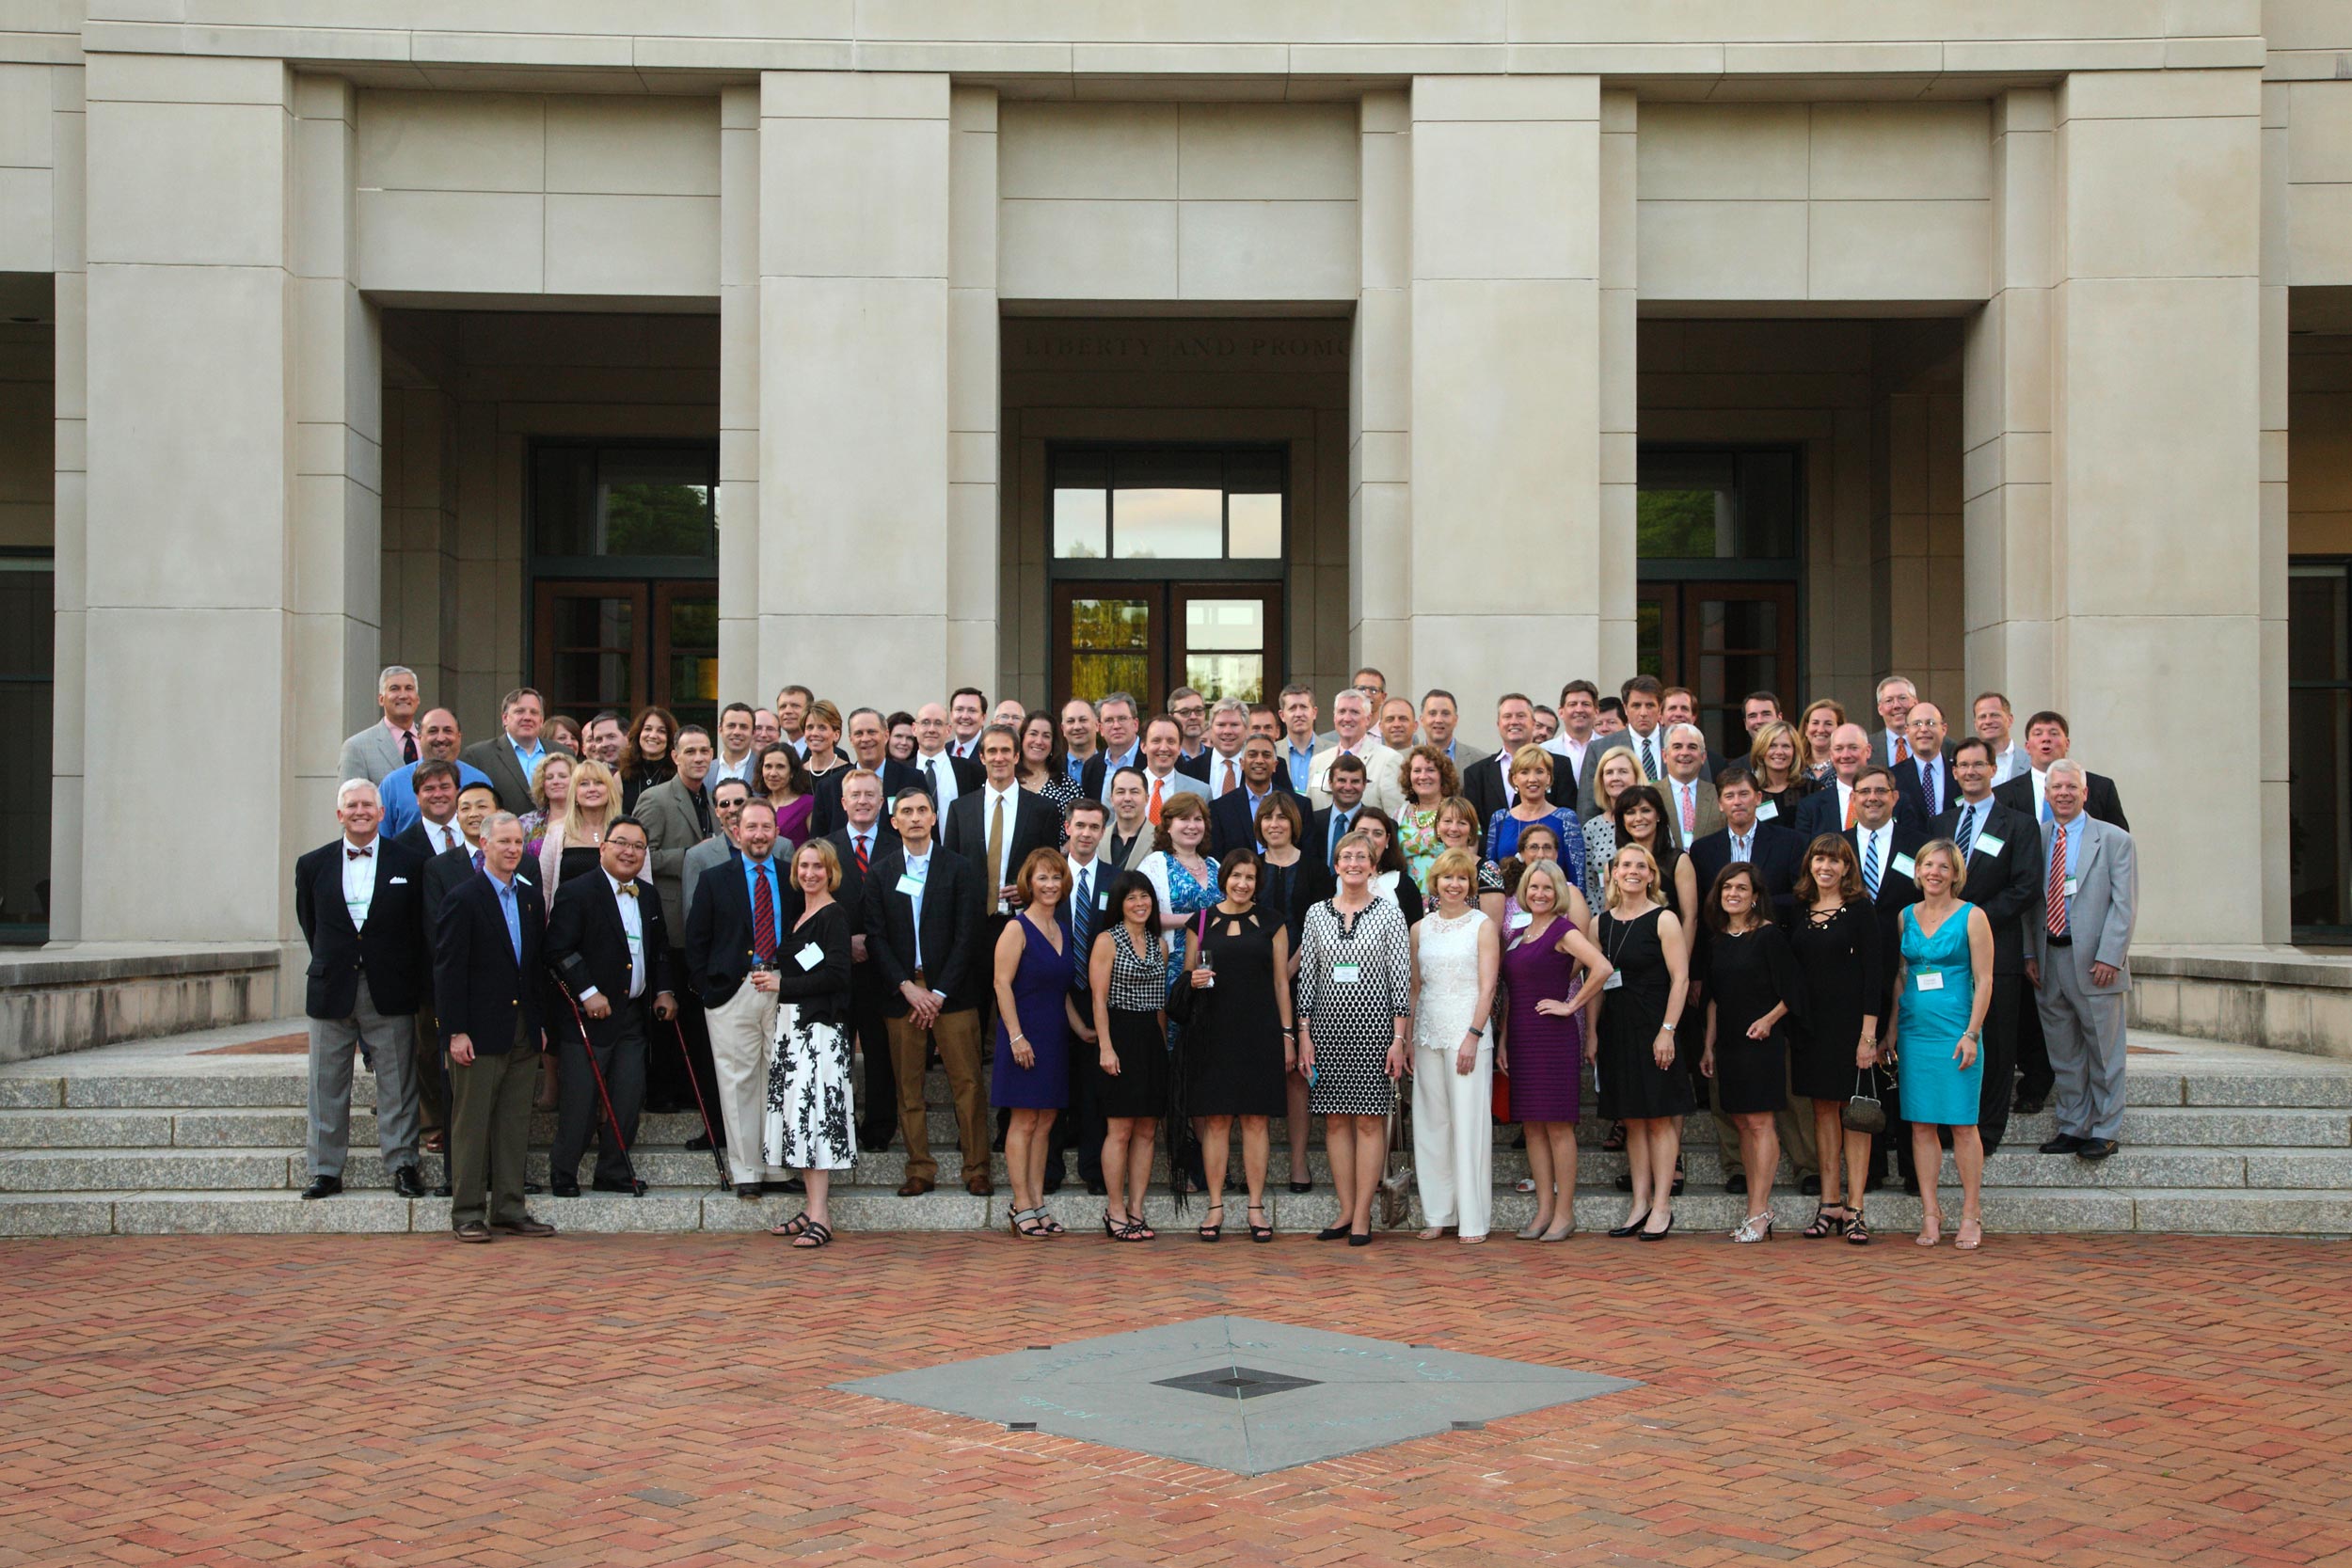 Class of 1990 law school stand on the steps of the School of Law for a group photo